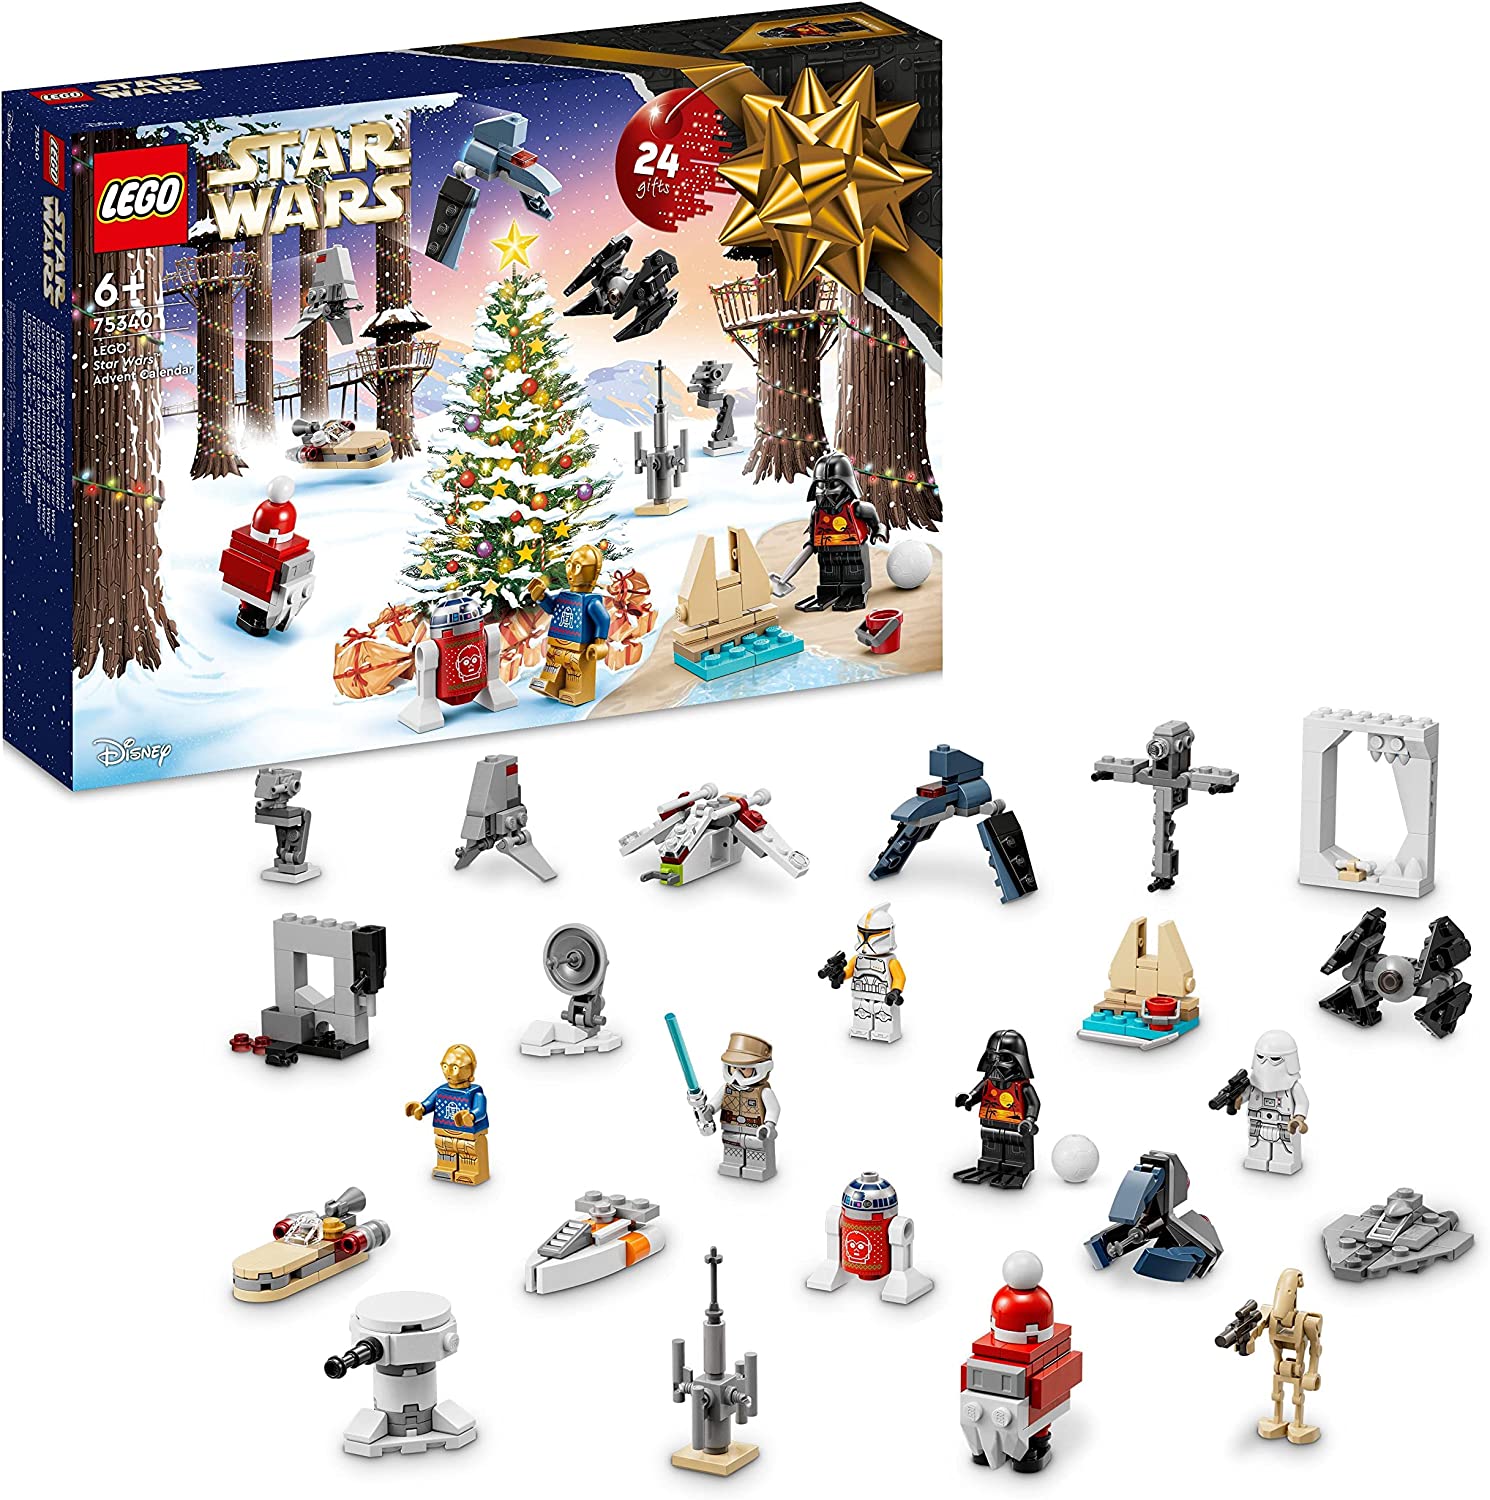 LEGO 75340 Star Wars 2022 Advent Calendar, 24 Christmas Toys, including Mini Figures Gonk Droid, R2-D2, Darth Vader and Buildable Vehicles